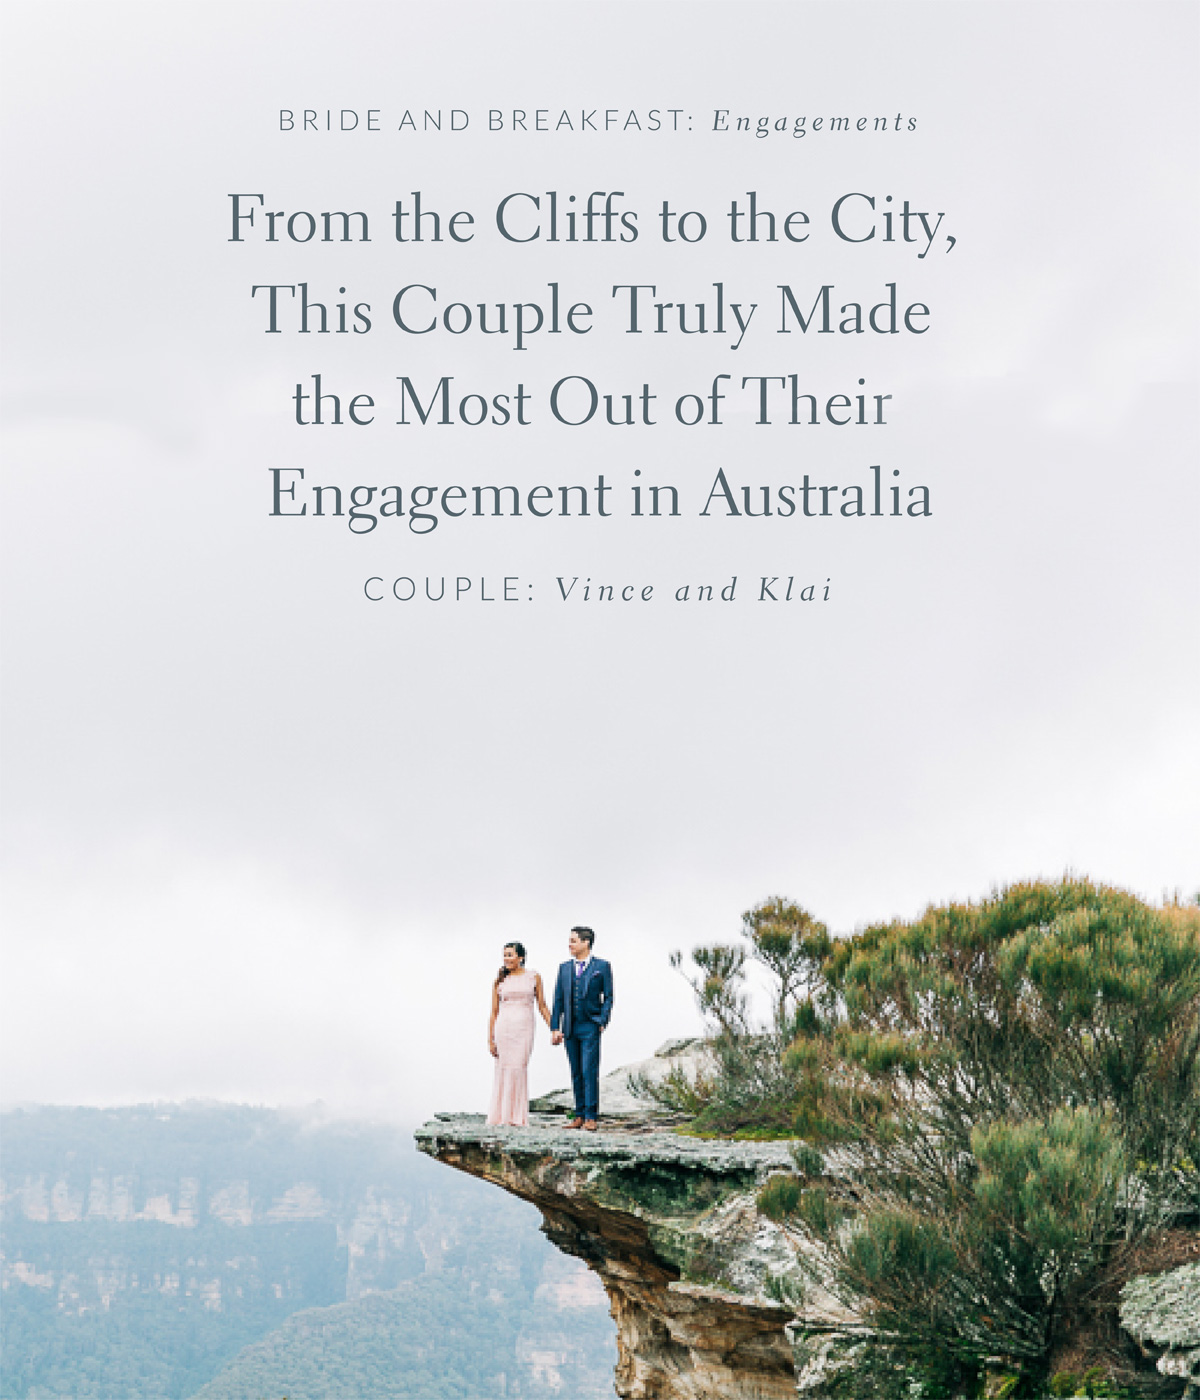 From the Cliffs to the City, This Couple Truly Made the Most Out of Their Engagement in Australia